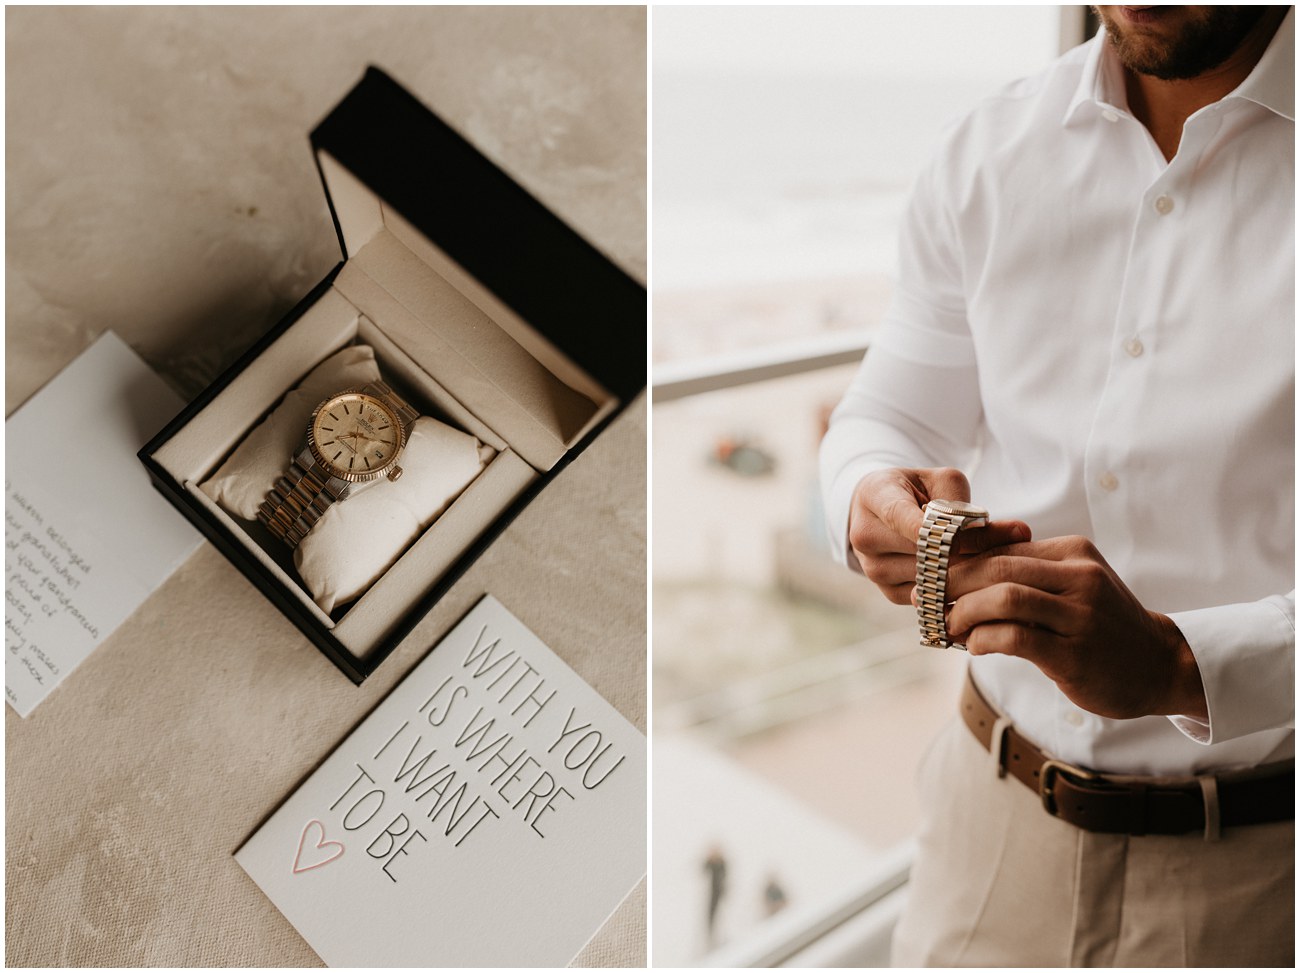 groom opening watch, a gift from bride